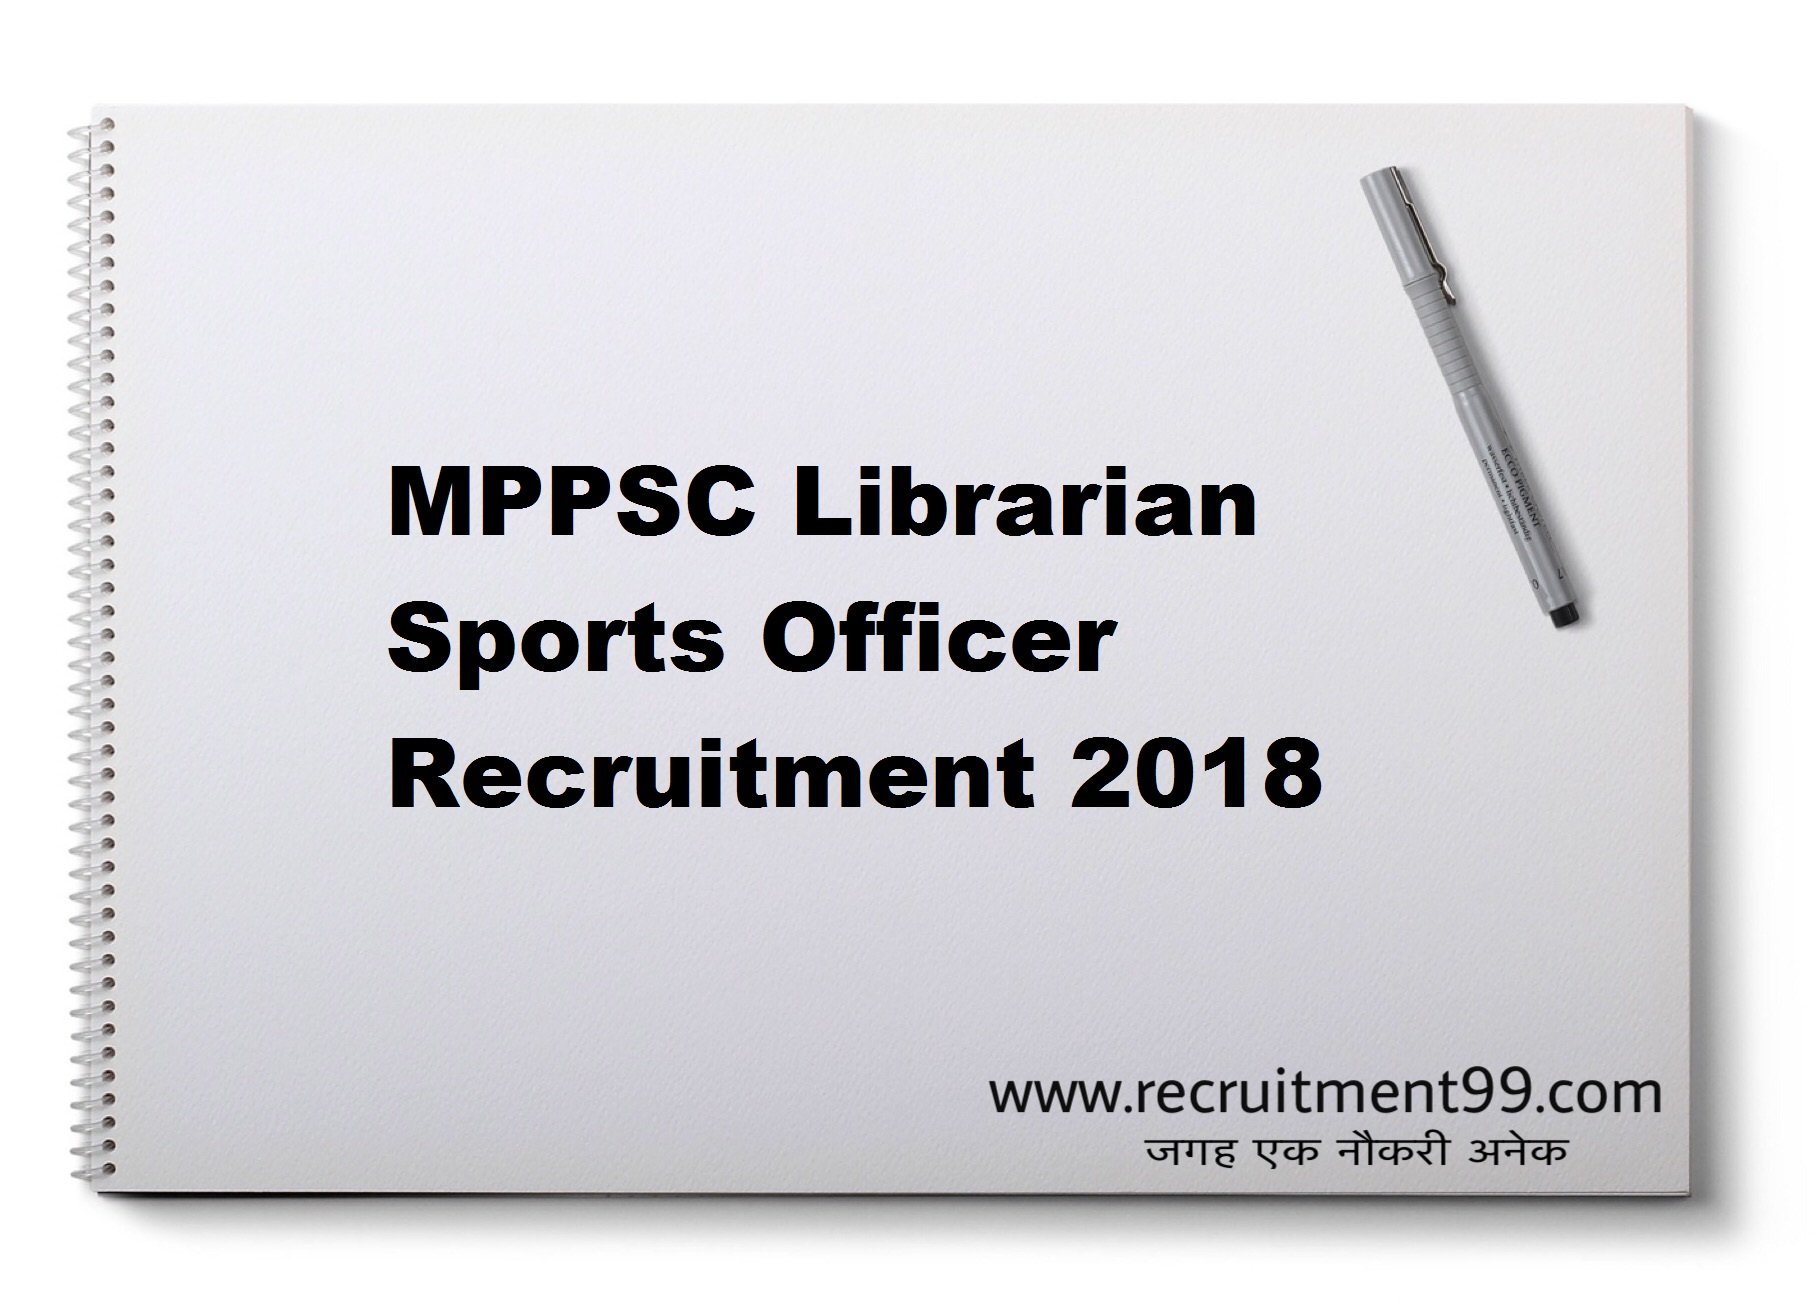 MPPSC Librarian Sports Officer Recruitment Admit Card Result 2018